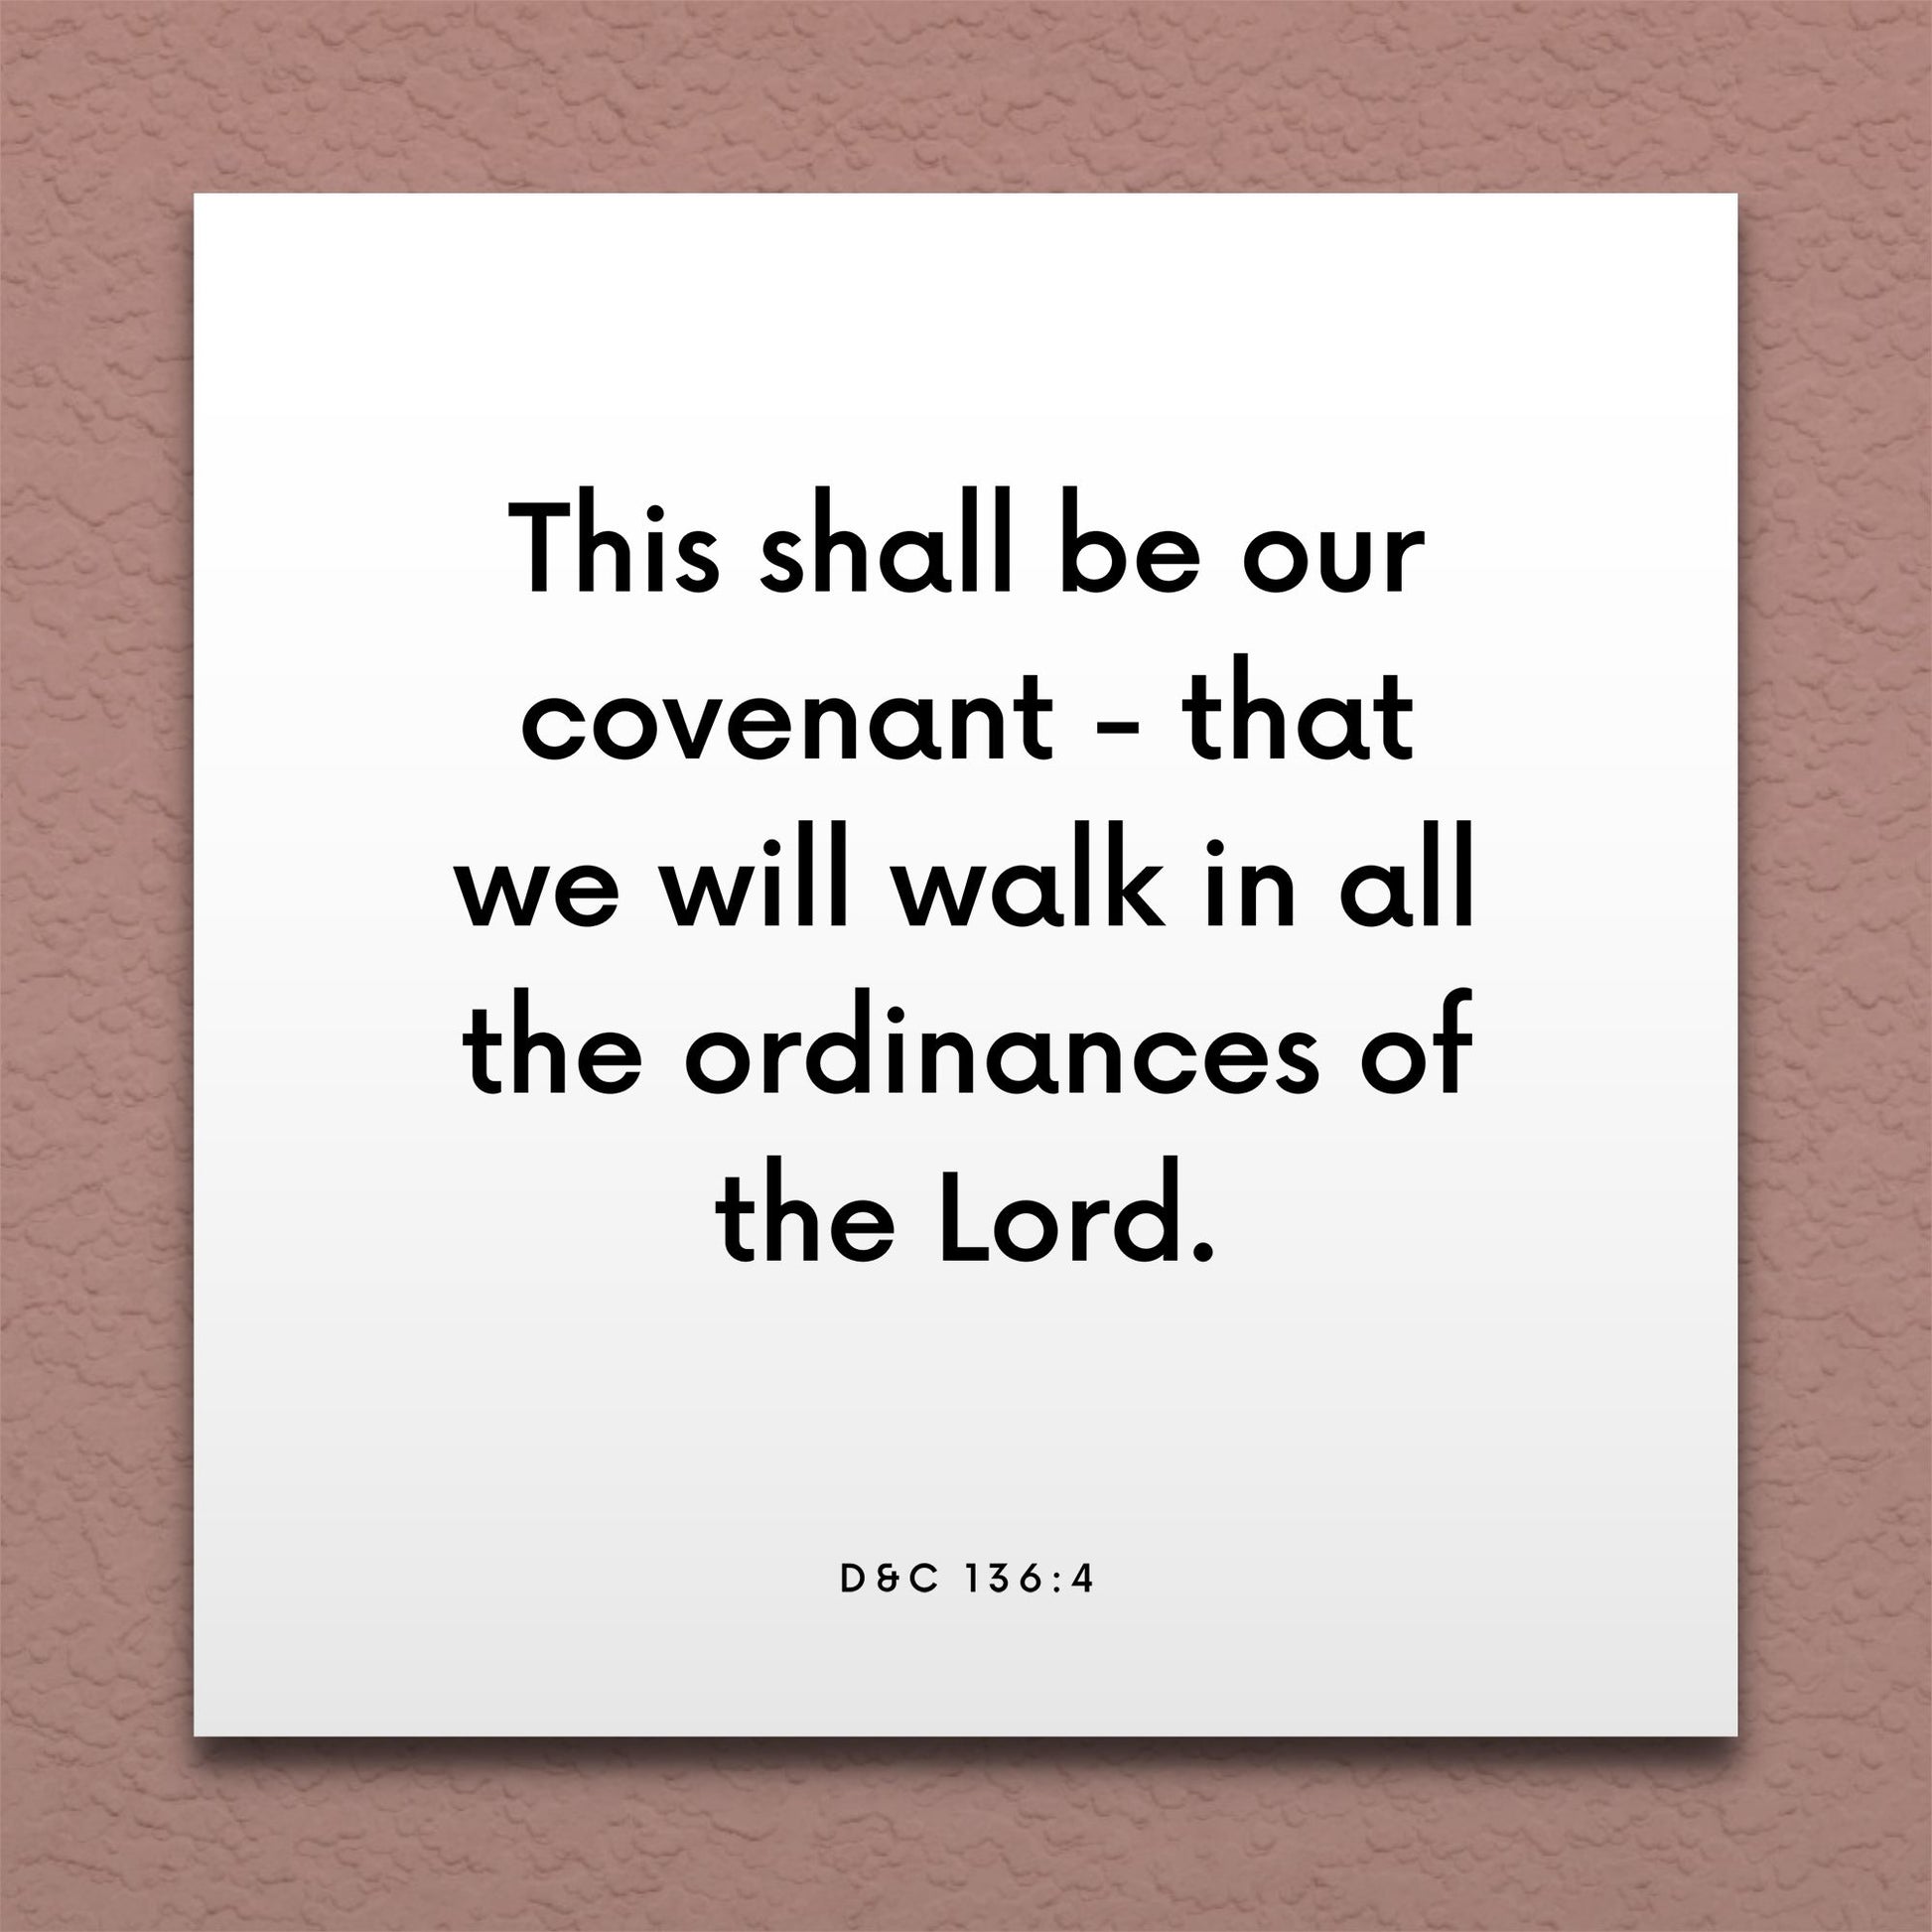 Wall-mounted scripture tile for D&C 136:4 - "We will walk in all the ordinances of the Lord"